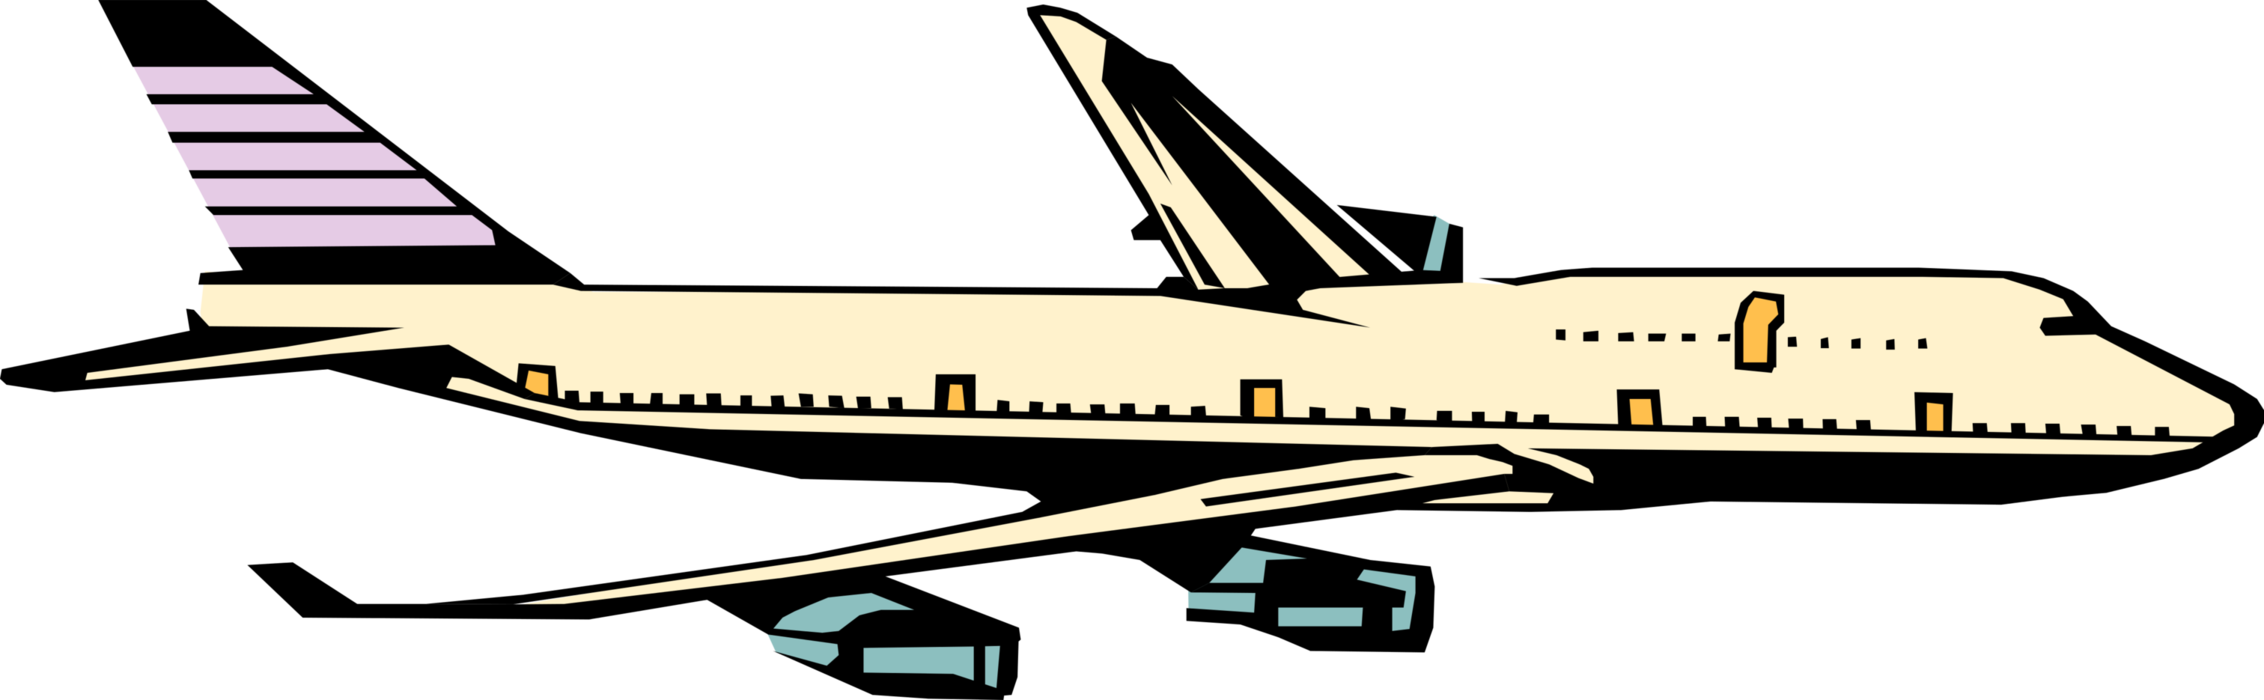 Vector Illustration Of Commercial 747 Airplane Boeing - Vector Illustration Of Commercial 747 Airplane Boeing (2264x700)